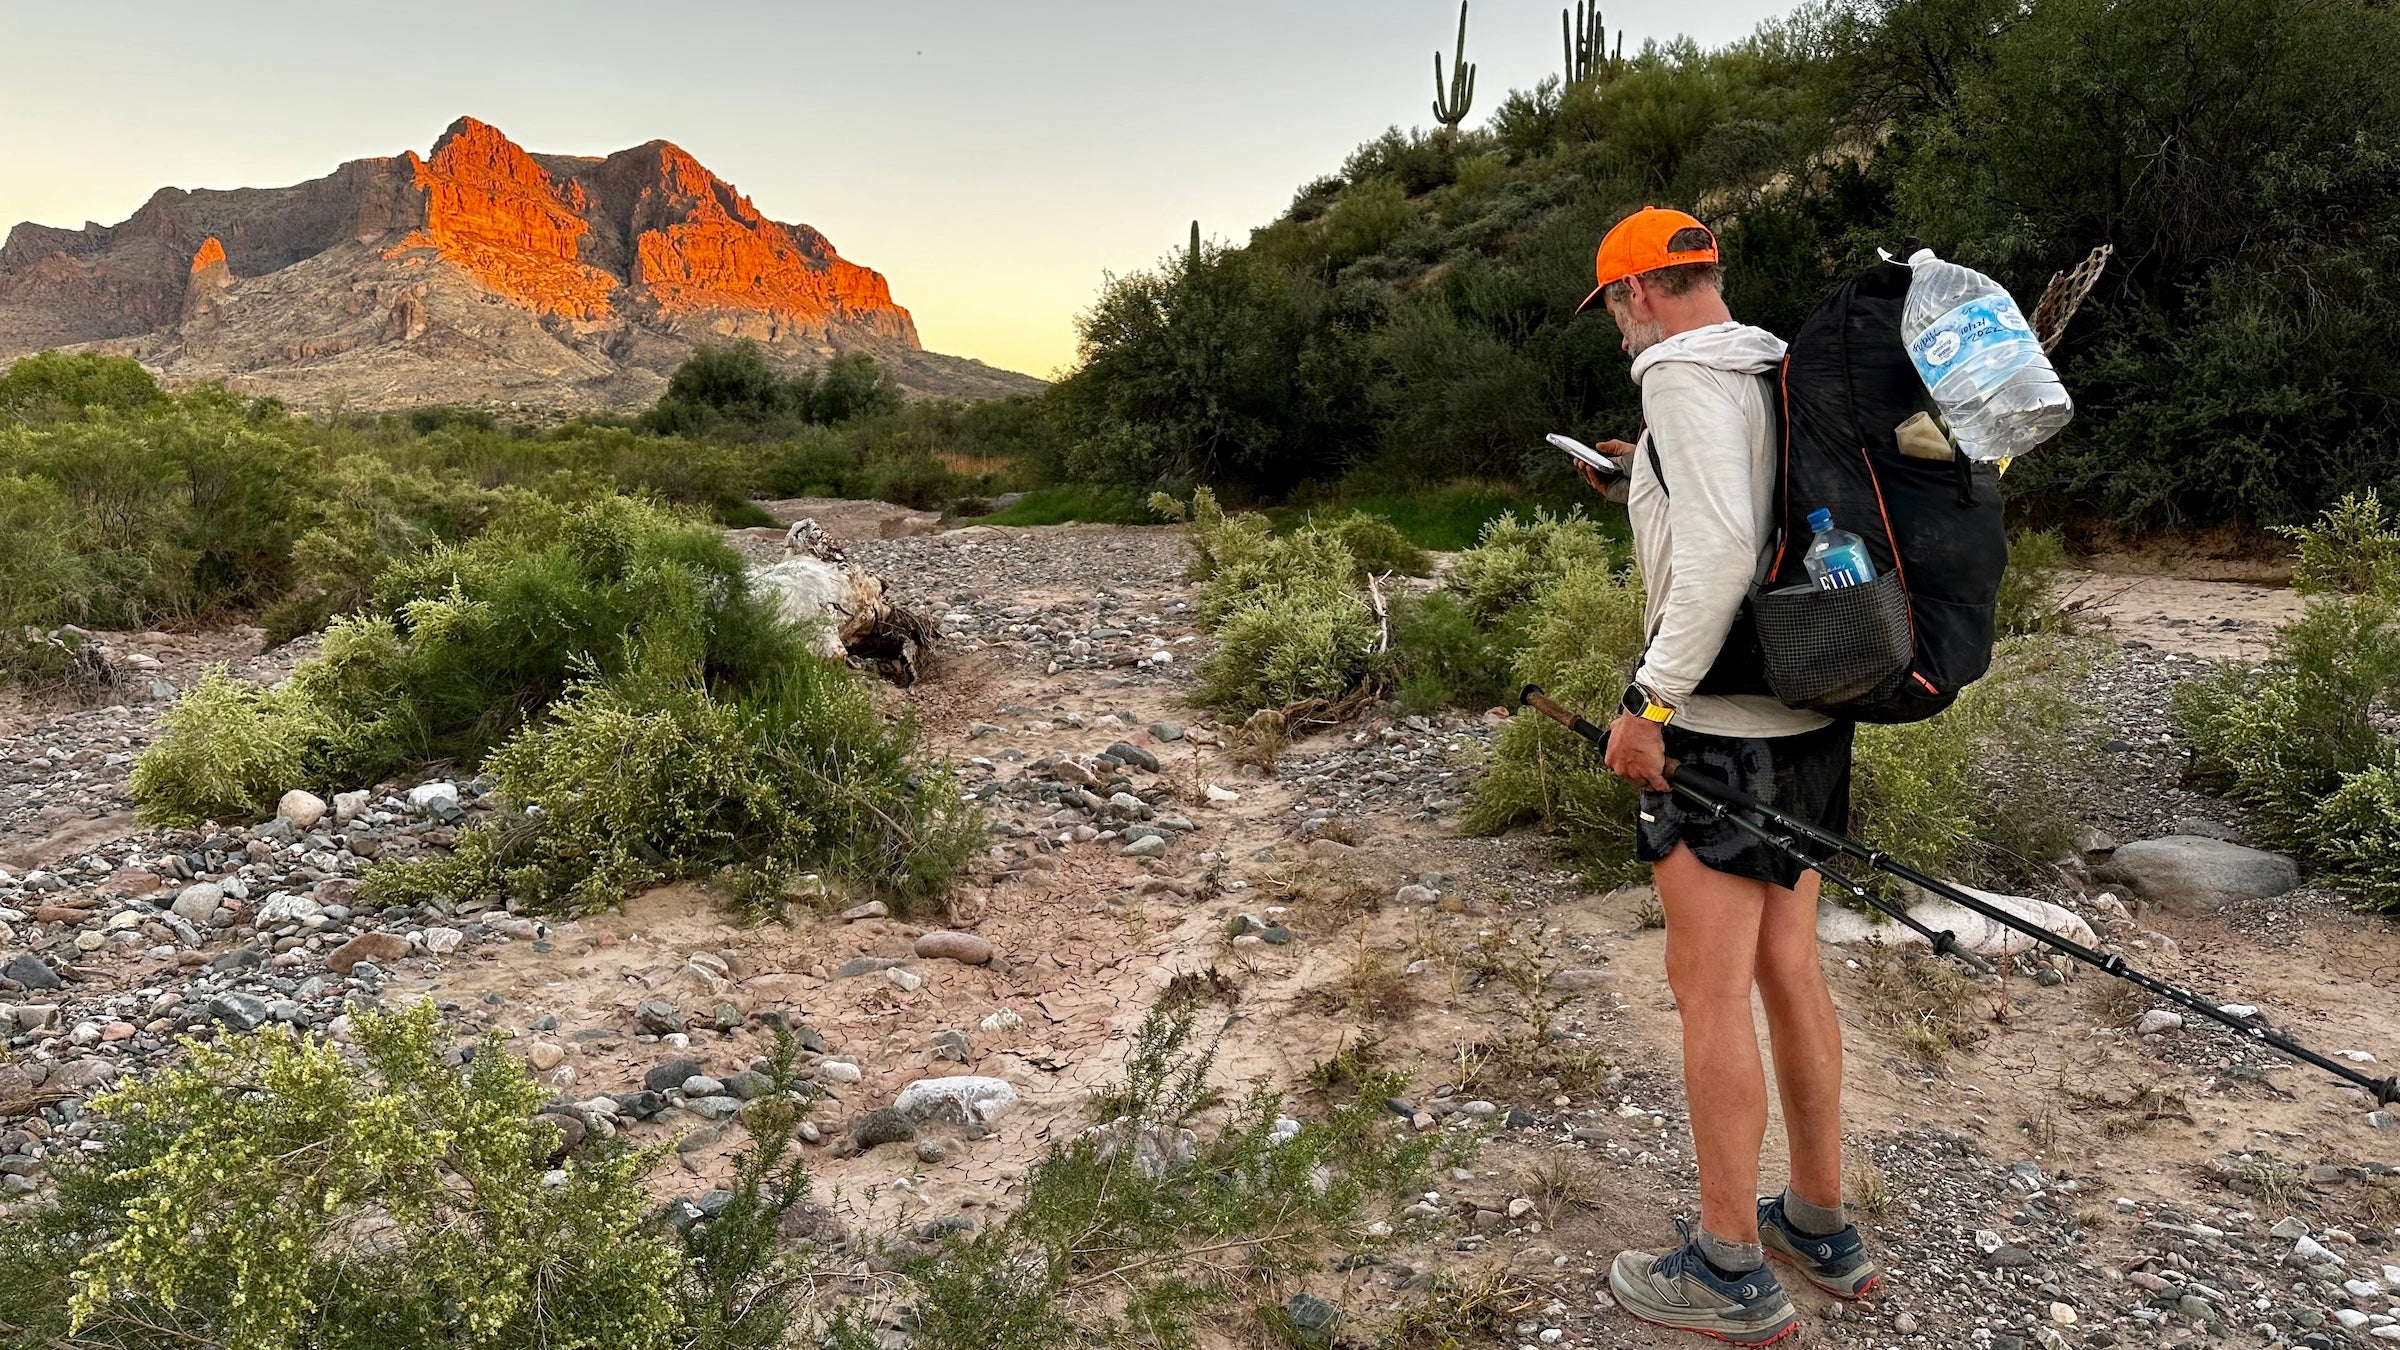 If You Don't Have Time for a Long Thru-Hike, the Arizona Trail Is